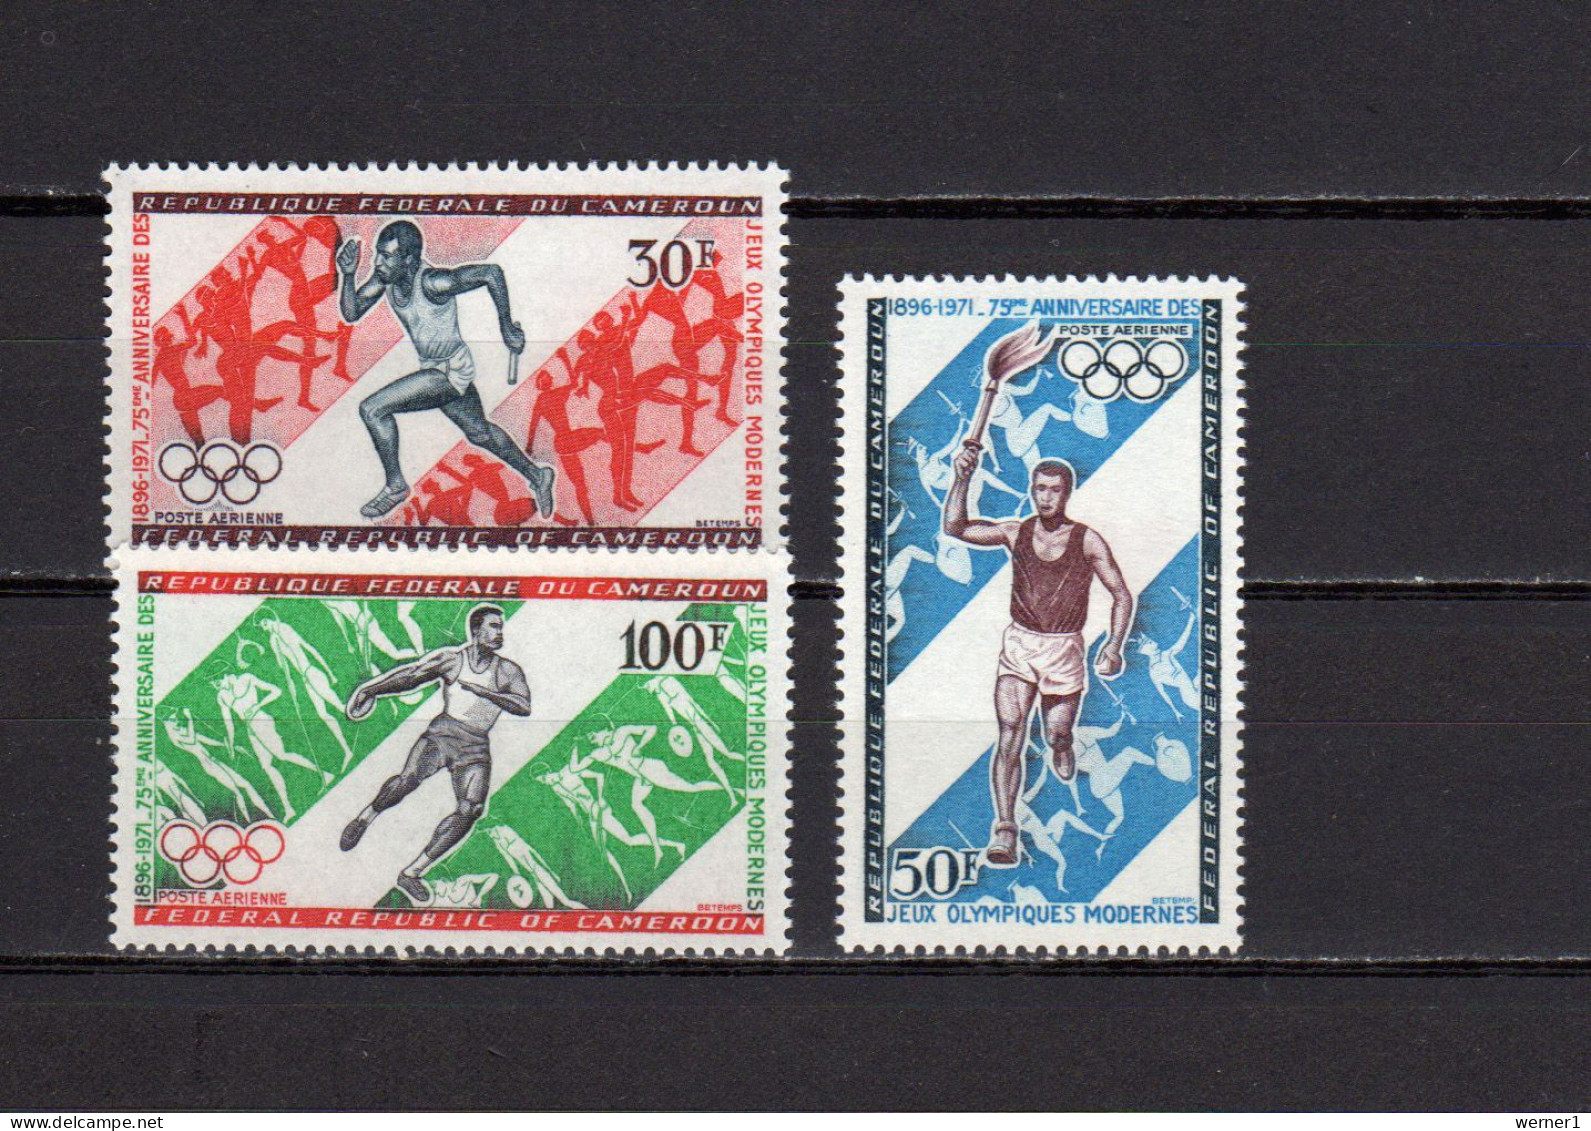 Cameroon - Cameroun 1971 Olympic Games, 75th Anniv. Of Olympic Games Set Of 3 MNH - Summer 1972: Munich